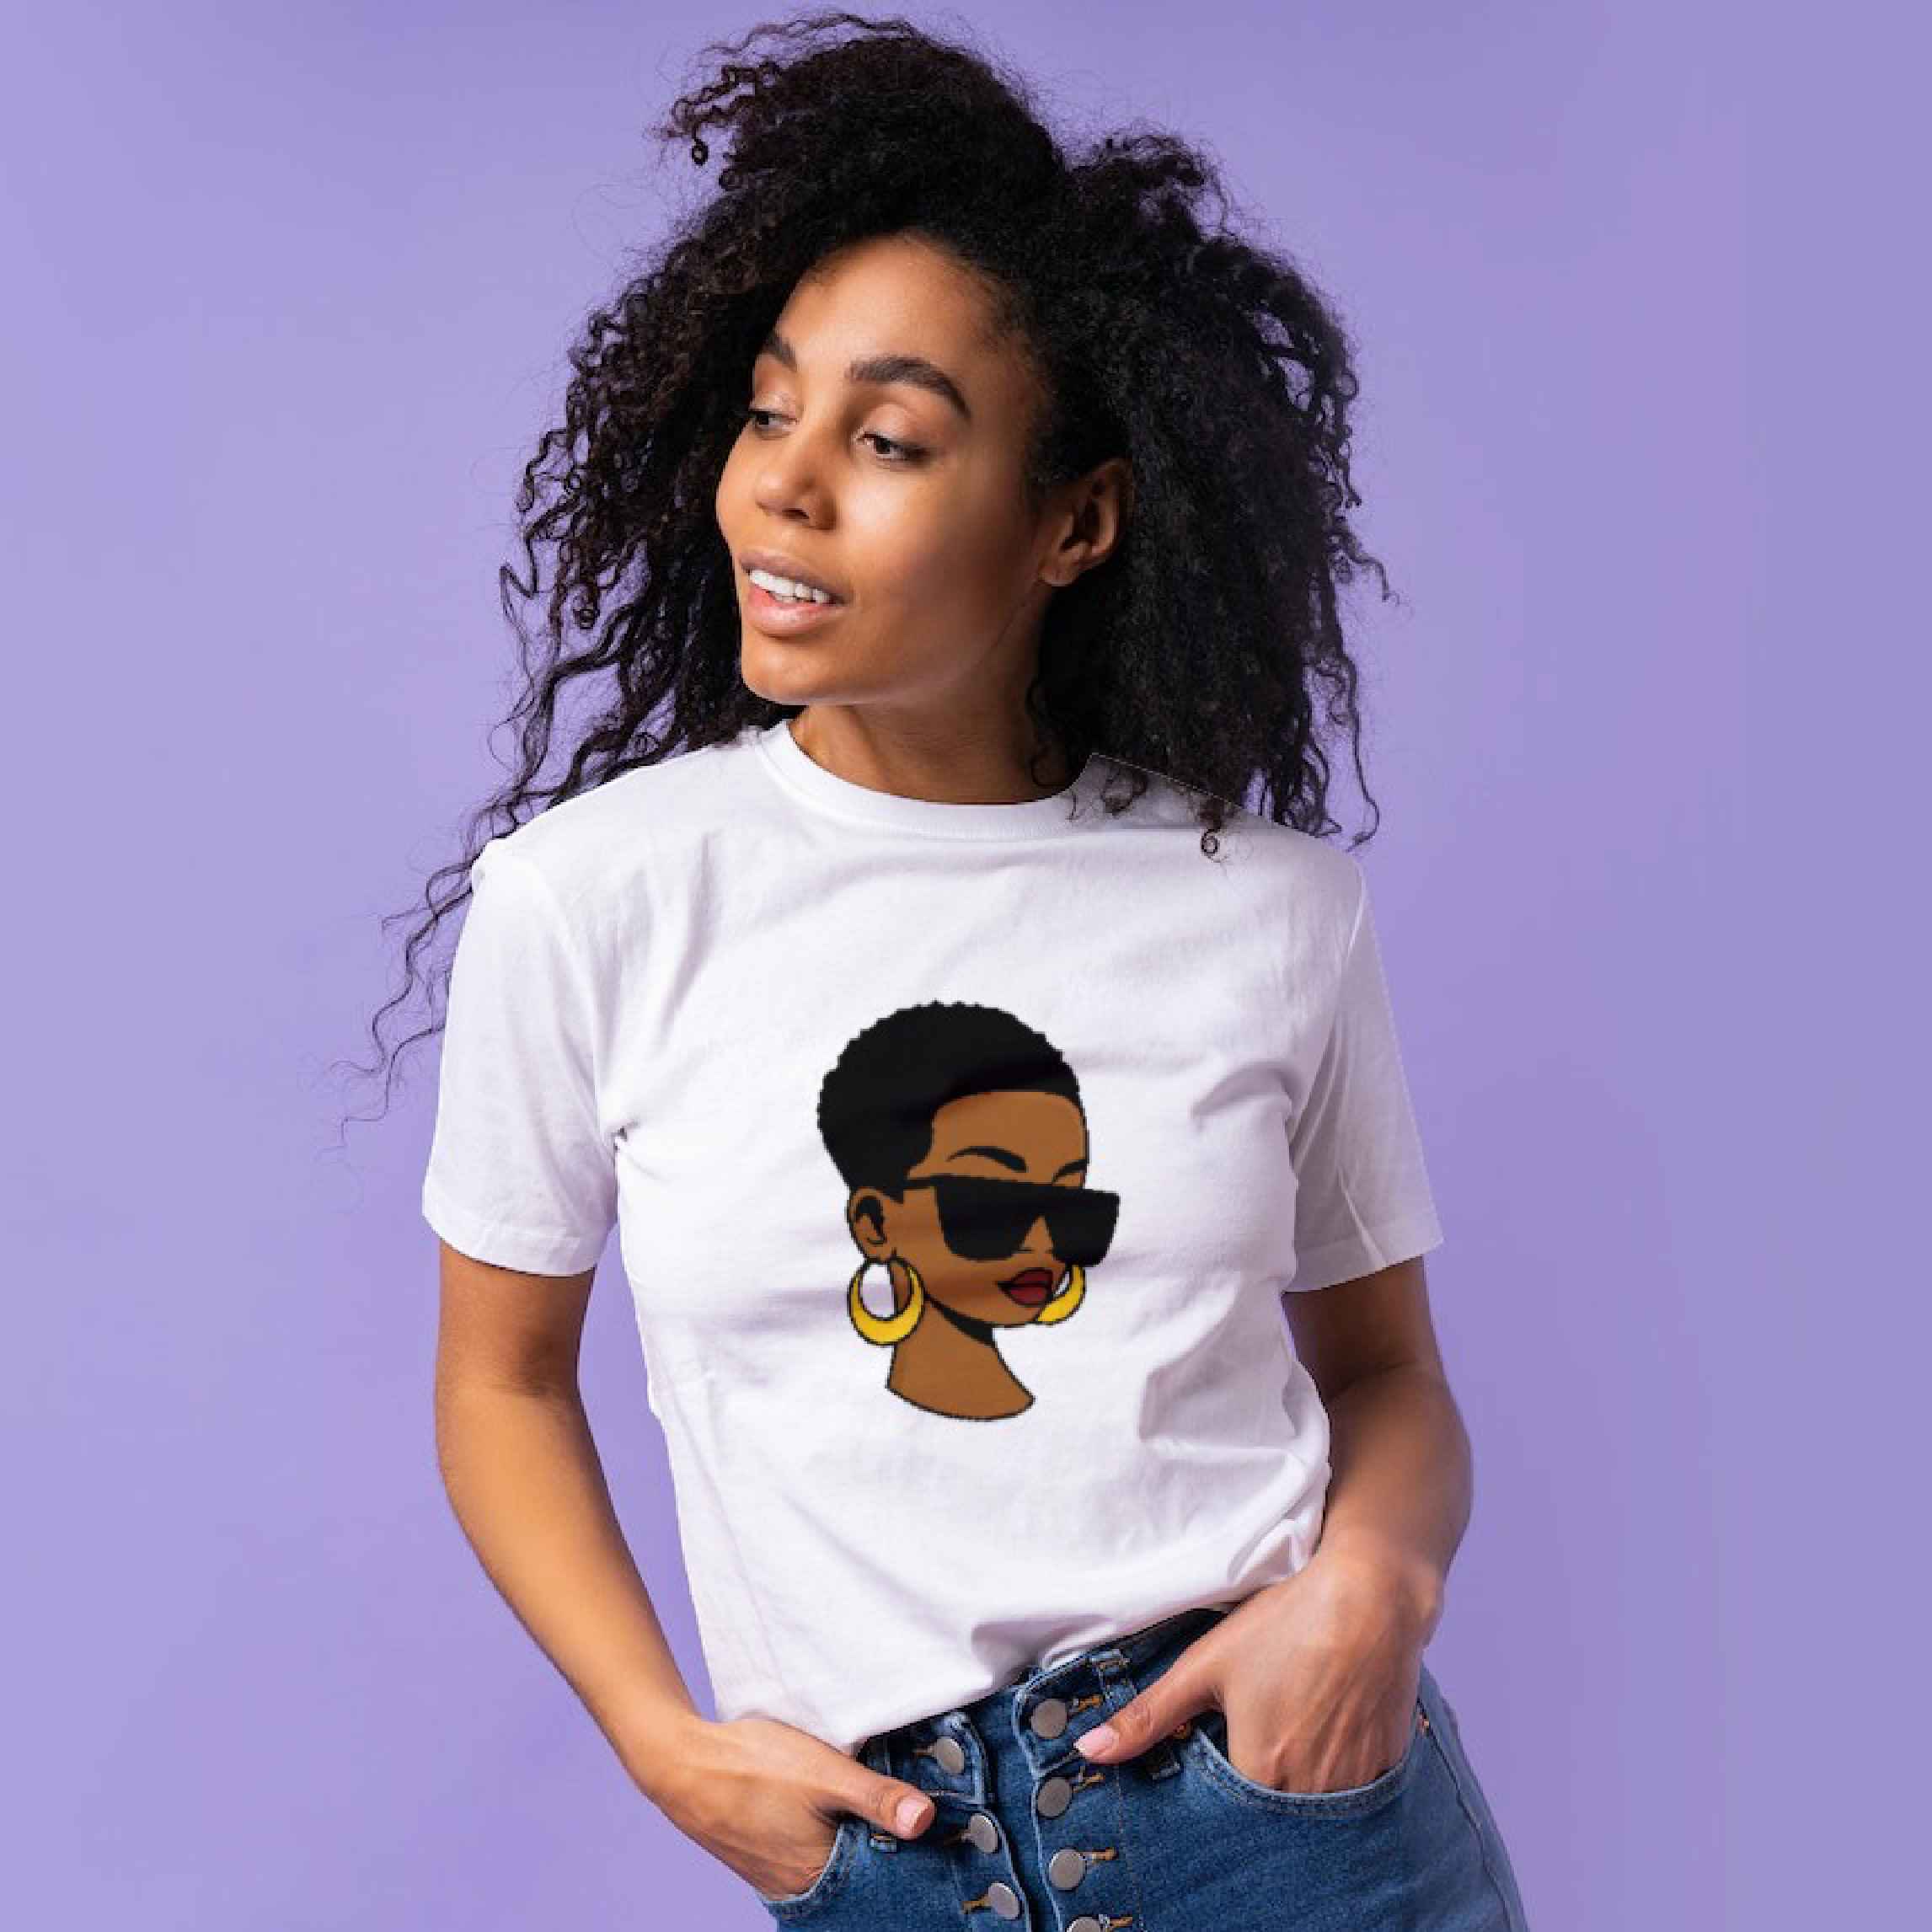 Black Woman T-Shirt Design ( SVG -PNG - JPG - EPS ) Included preview image.